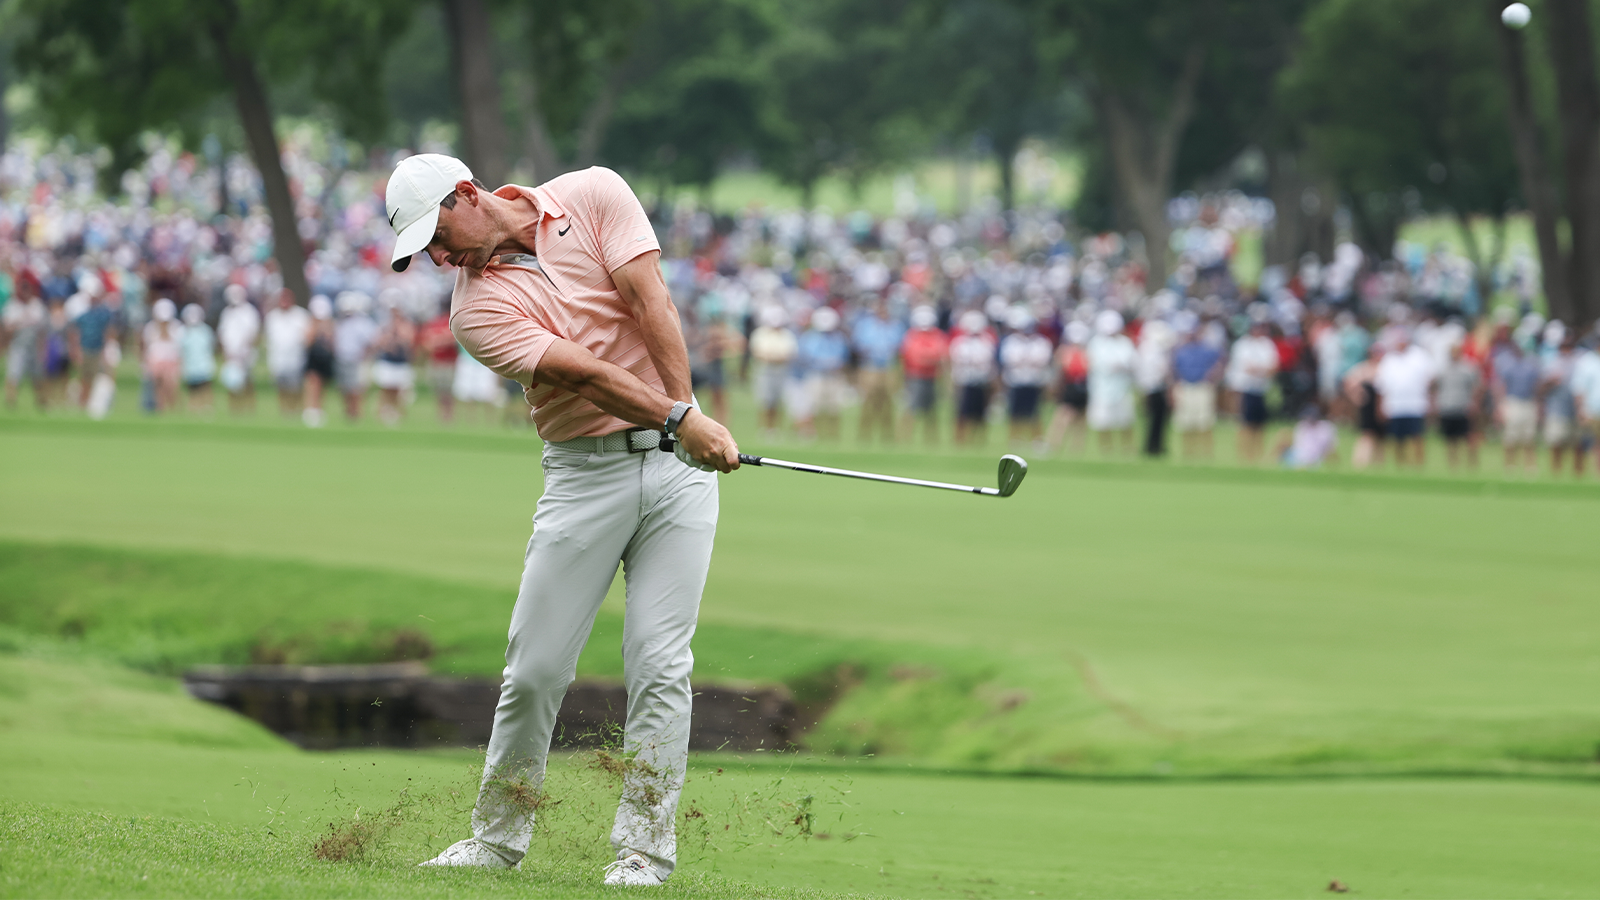 Rory McIlroy of Northern Ireland hits his shot on the second hole during the second round of the 2022 PGA Championship at the Southern Hills on May 20, 2022 in Tulsa, Oklahoma. (Photo by Maddie Meyer/PGA of America)